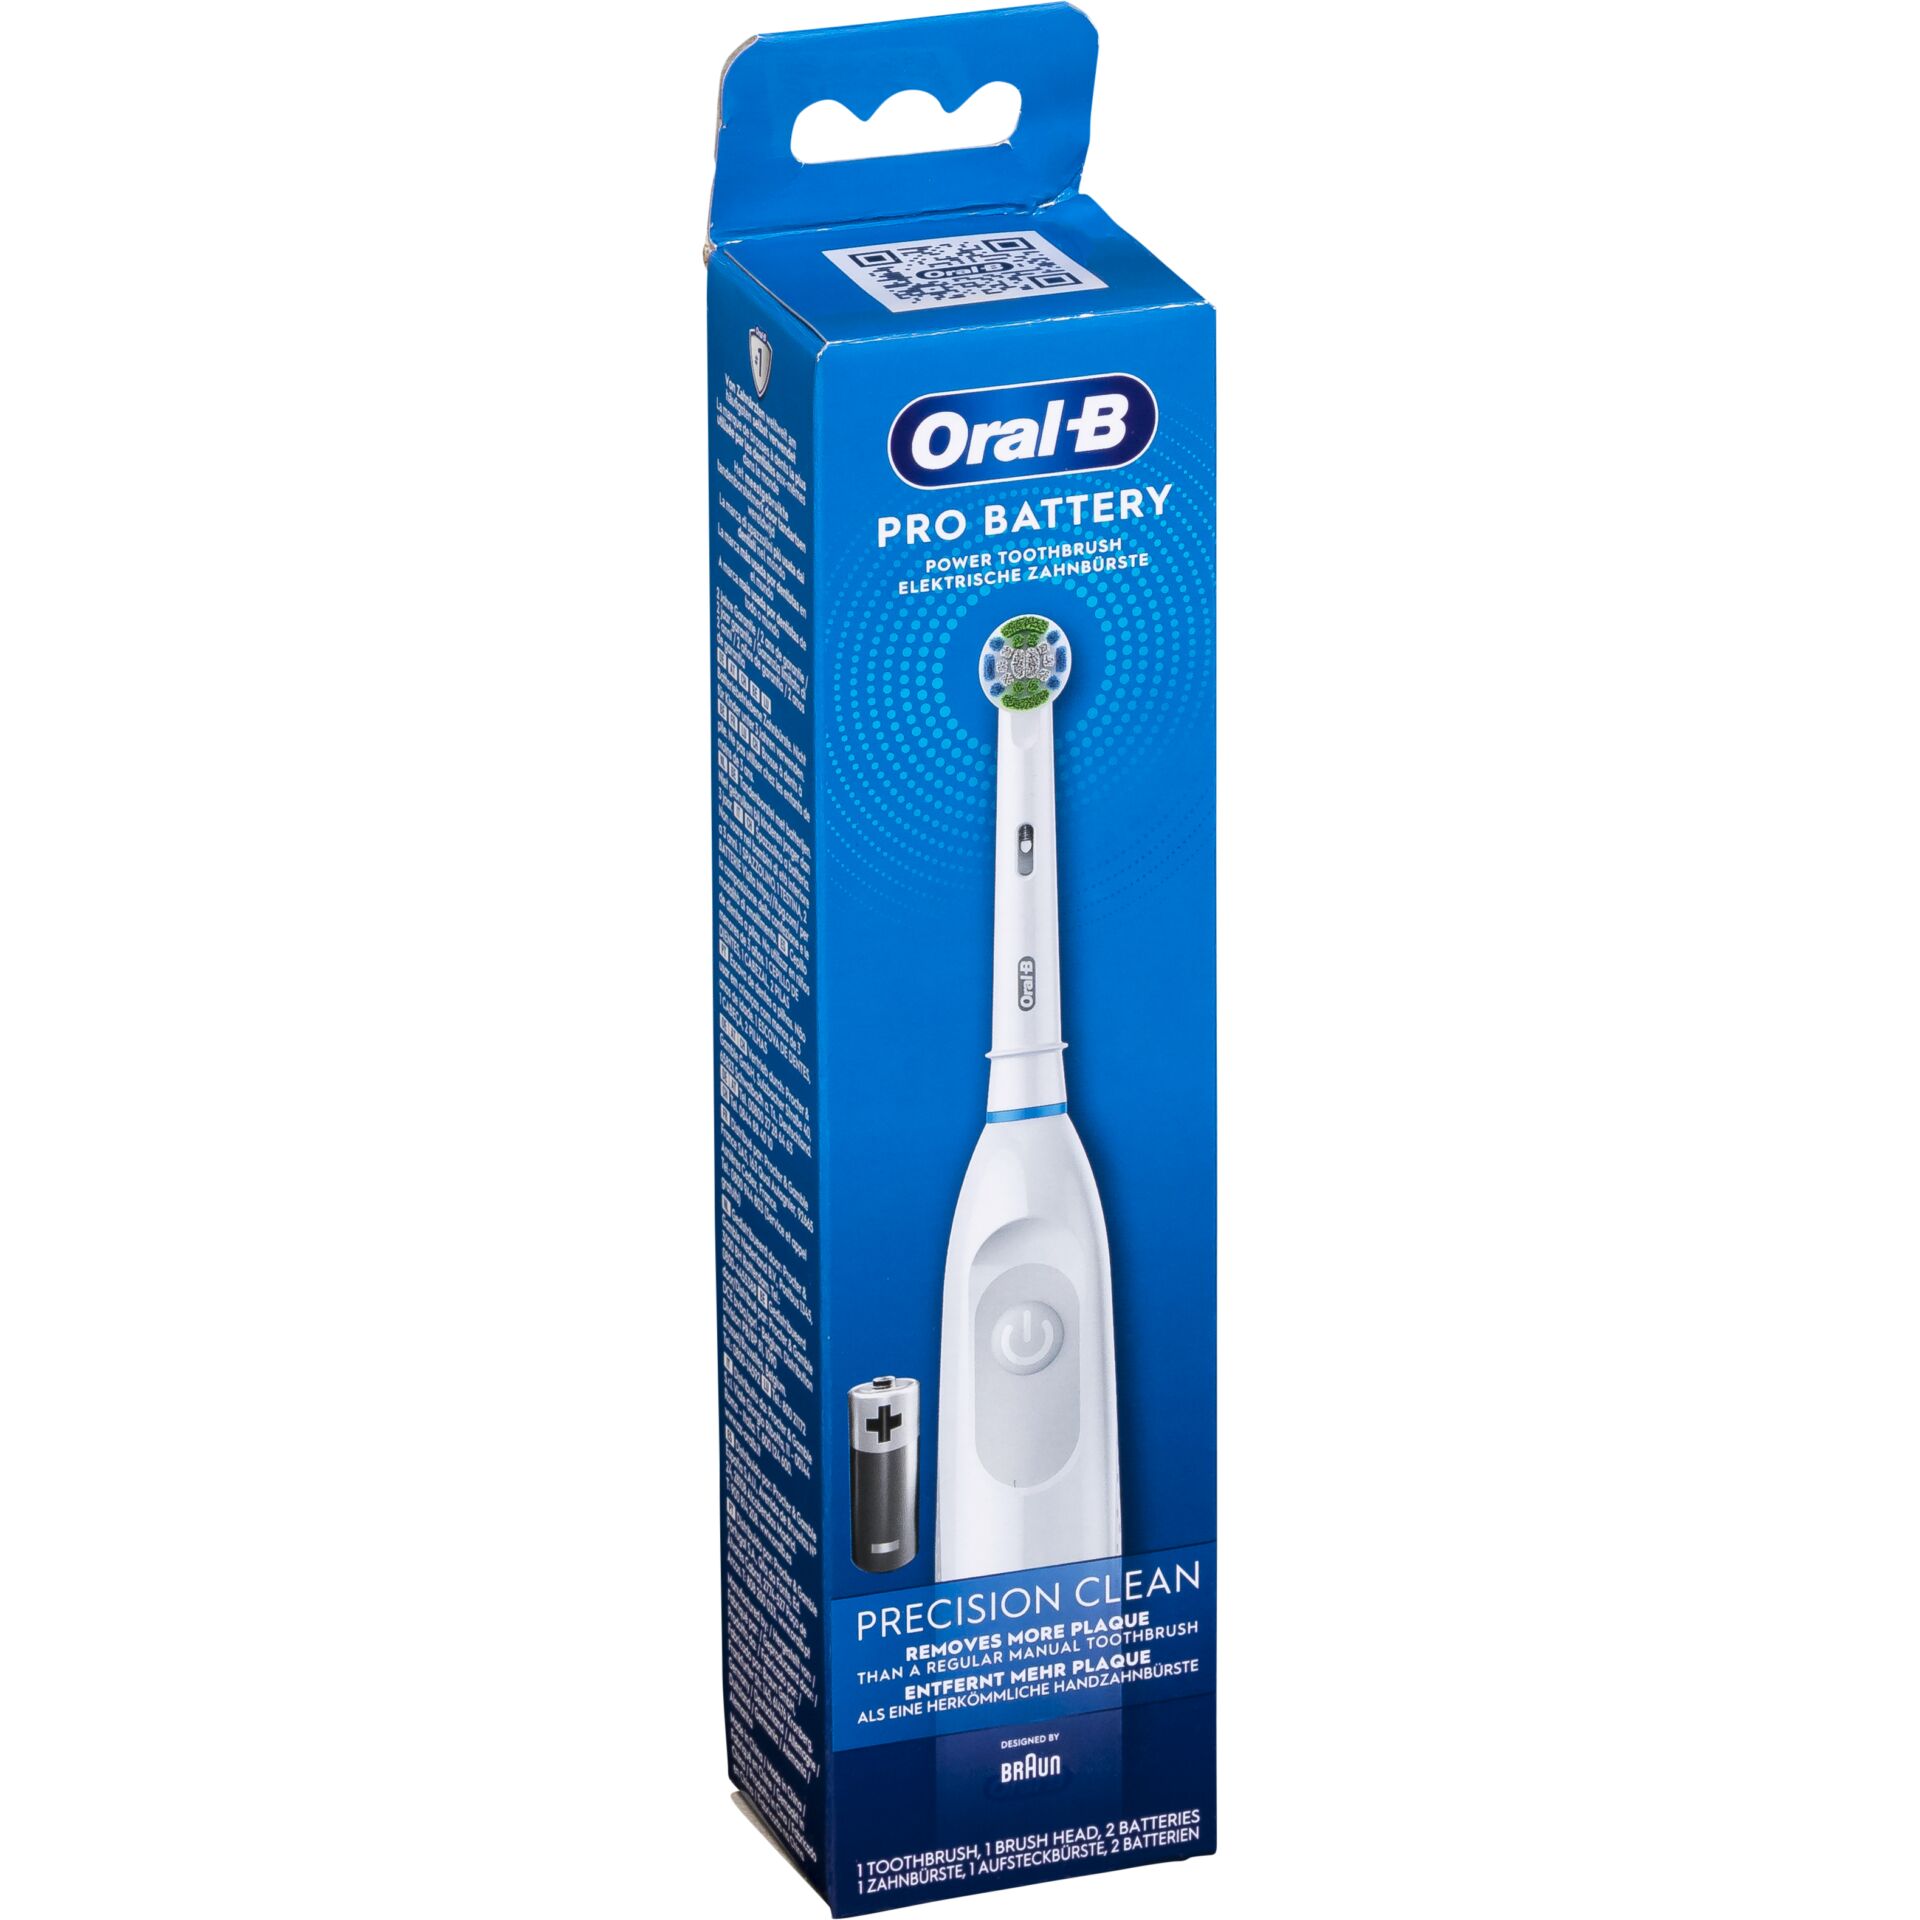 Oral-B Adult bianco spazzolino a batterie